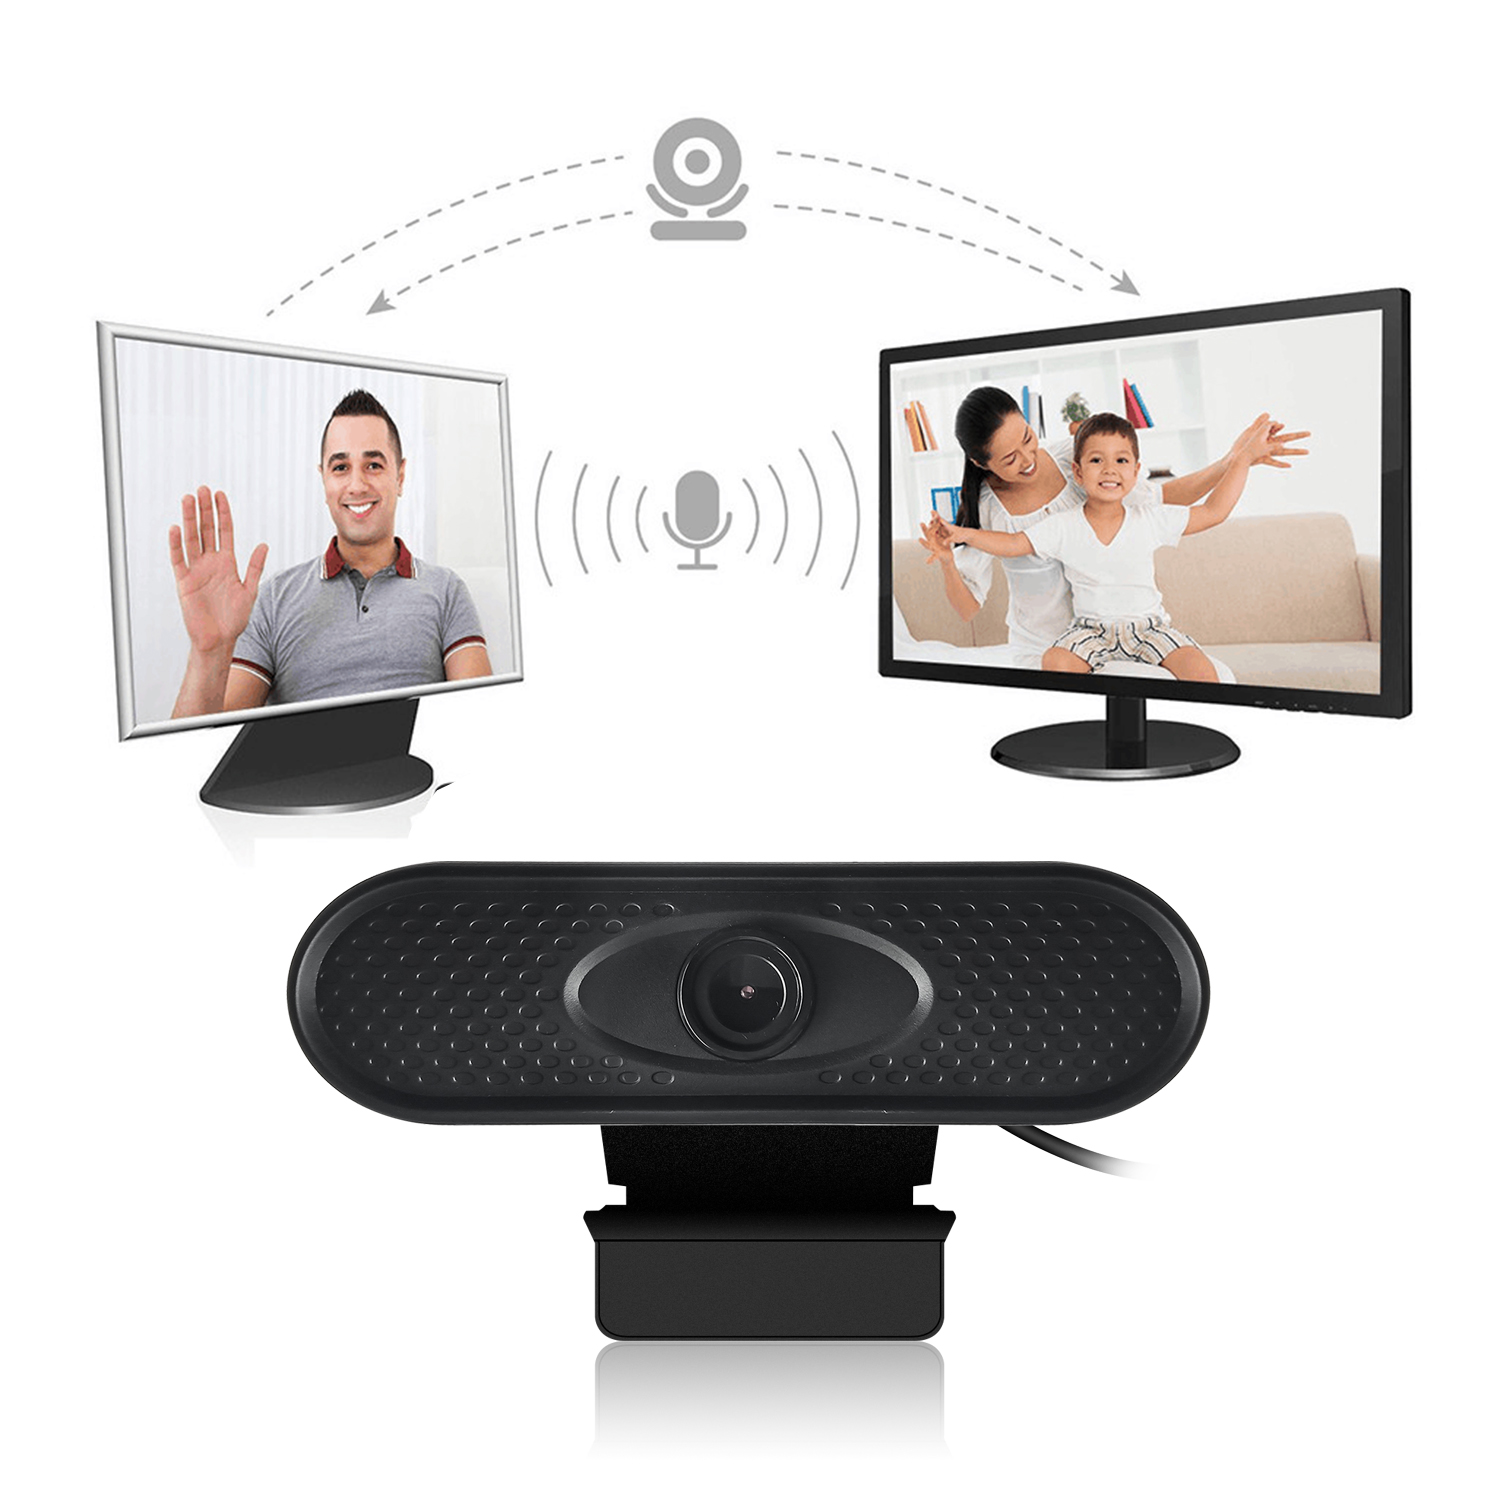 1080P-HD-USB-Webcam-Conference-Live-Manual-Focus-Computer-Camera-Built-in-Omni-directional-Micphone--1674541-8